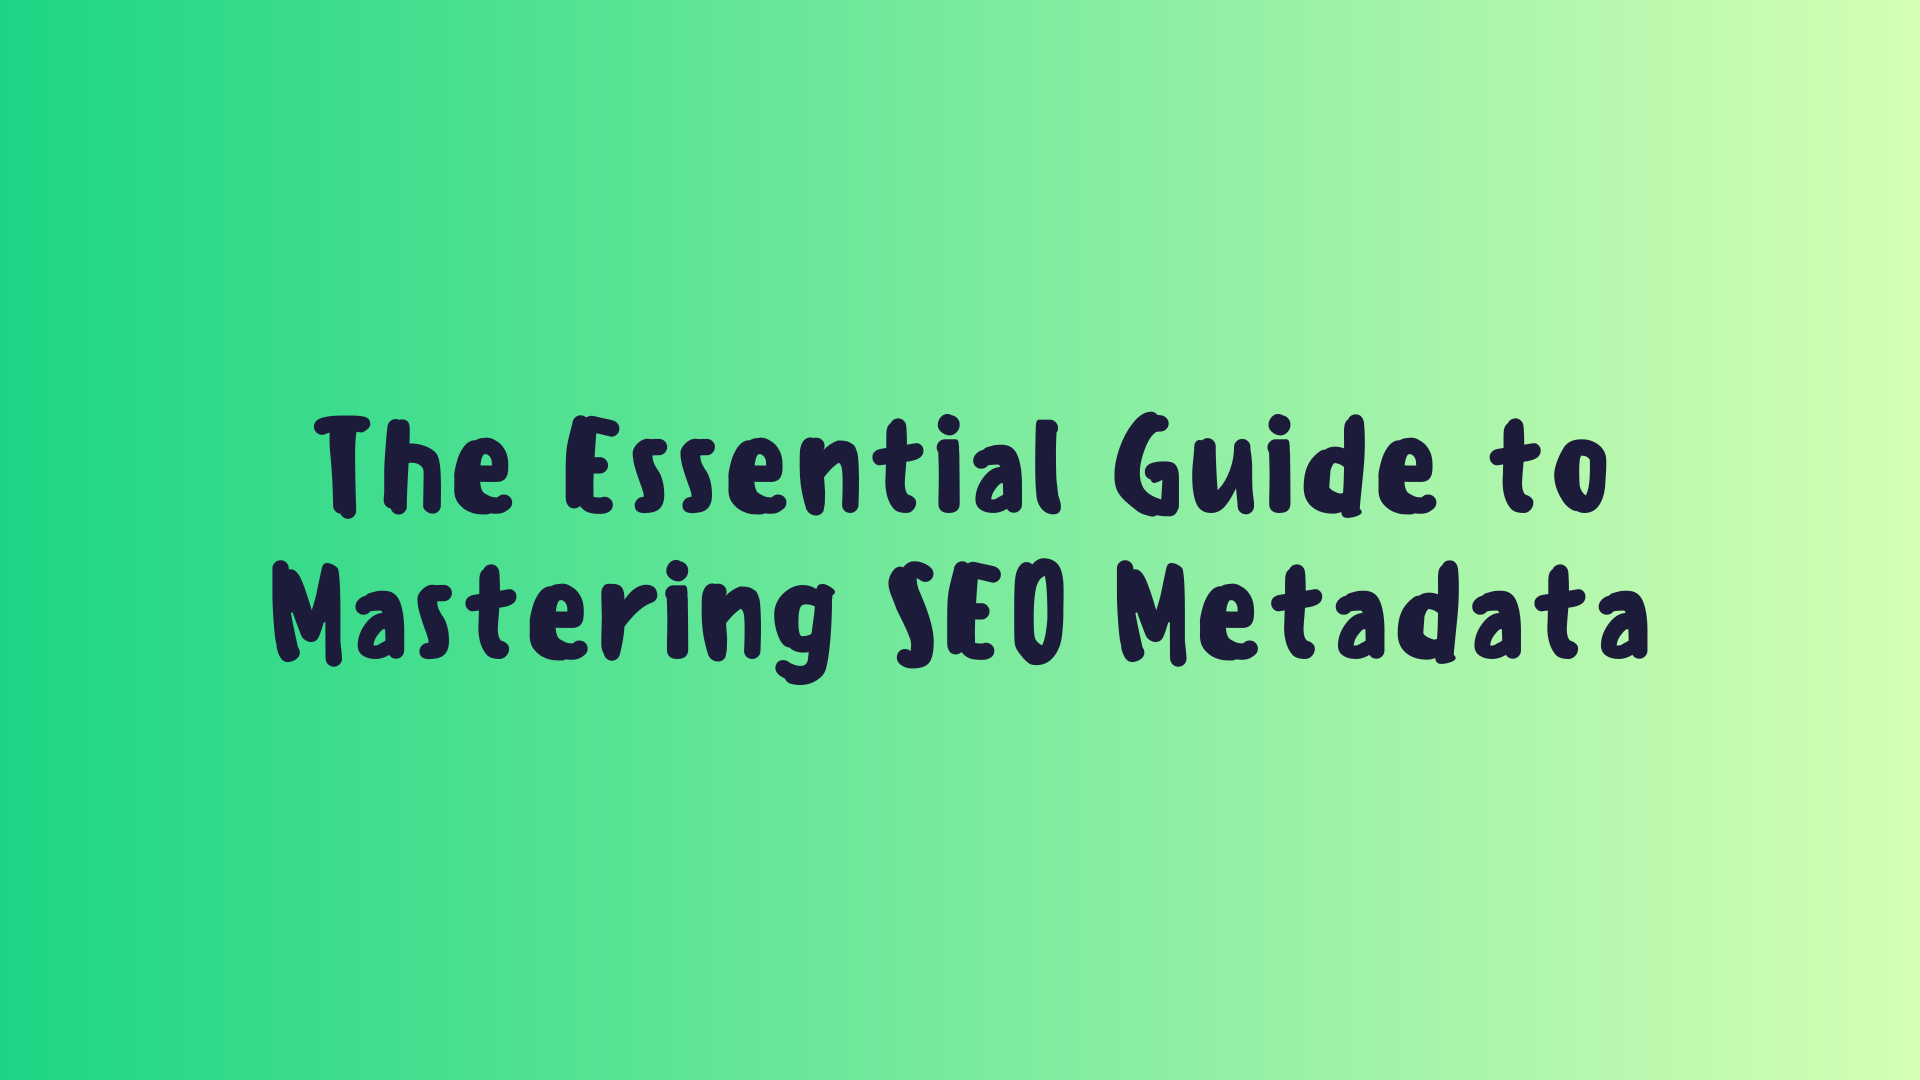 The Essential Guide to Mastering SEO Metadata